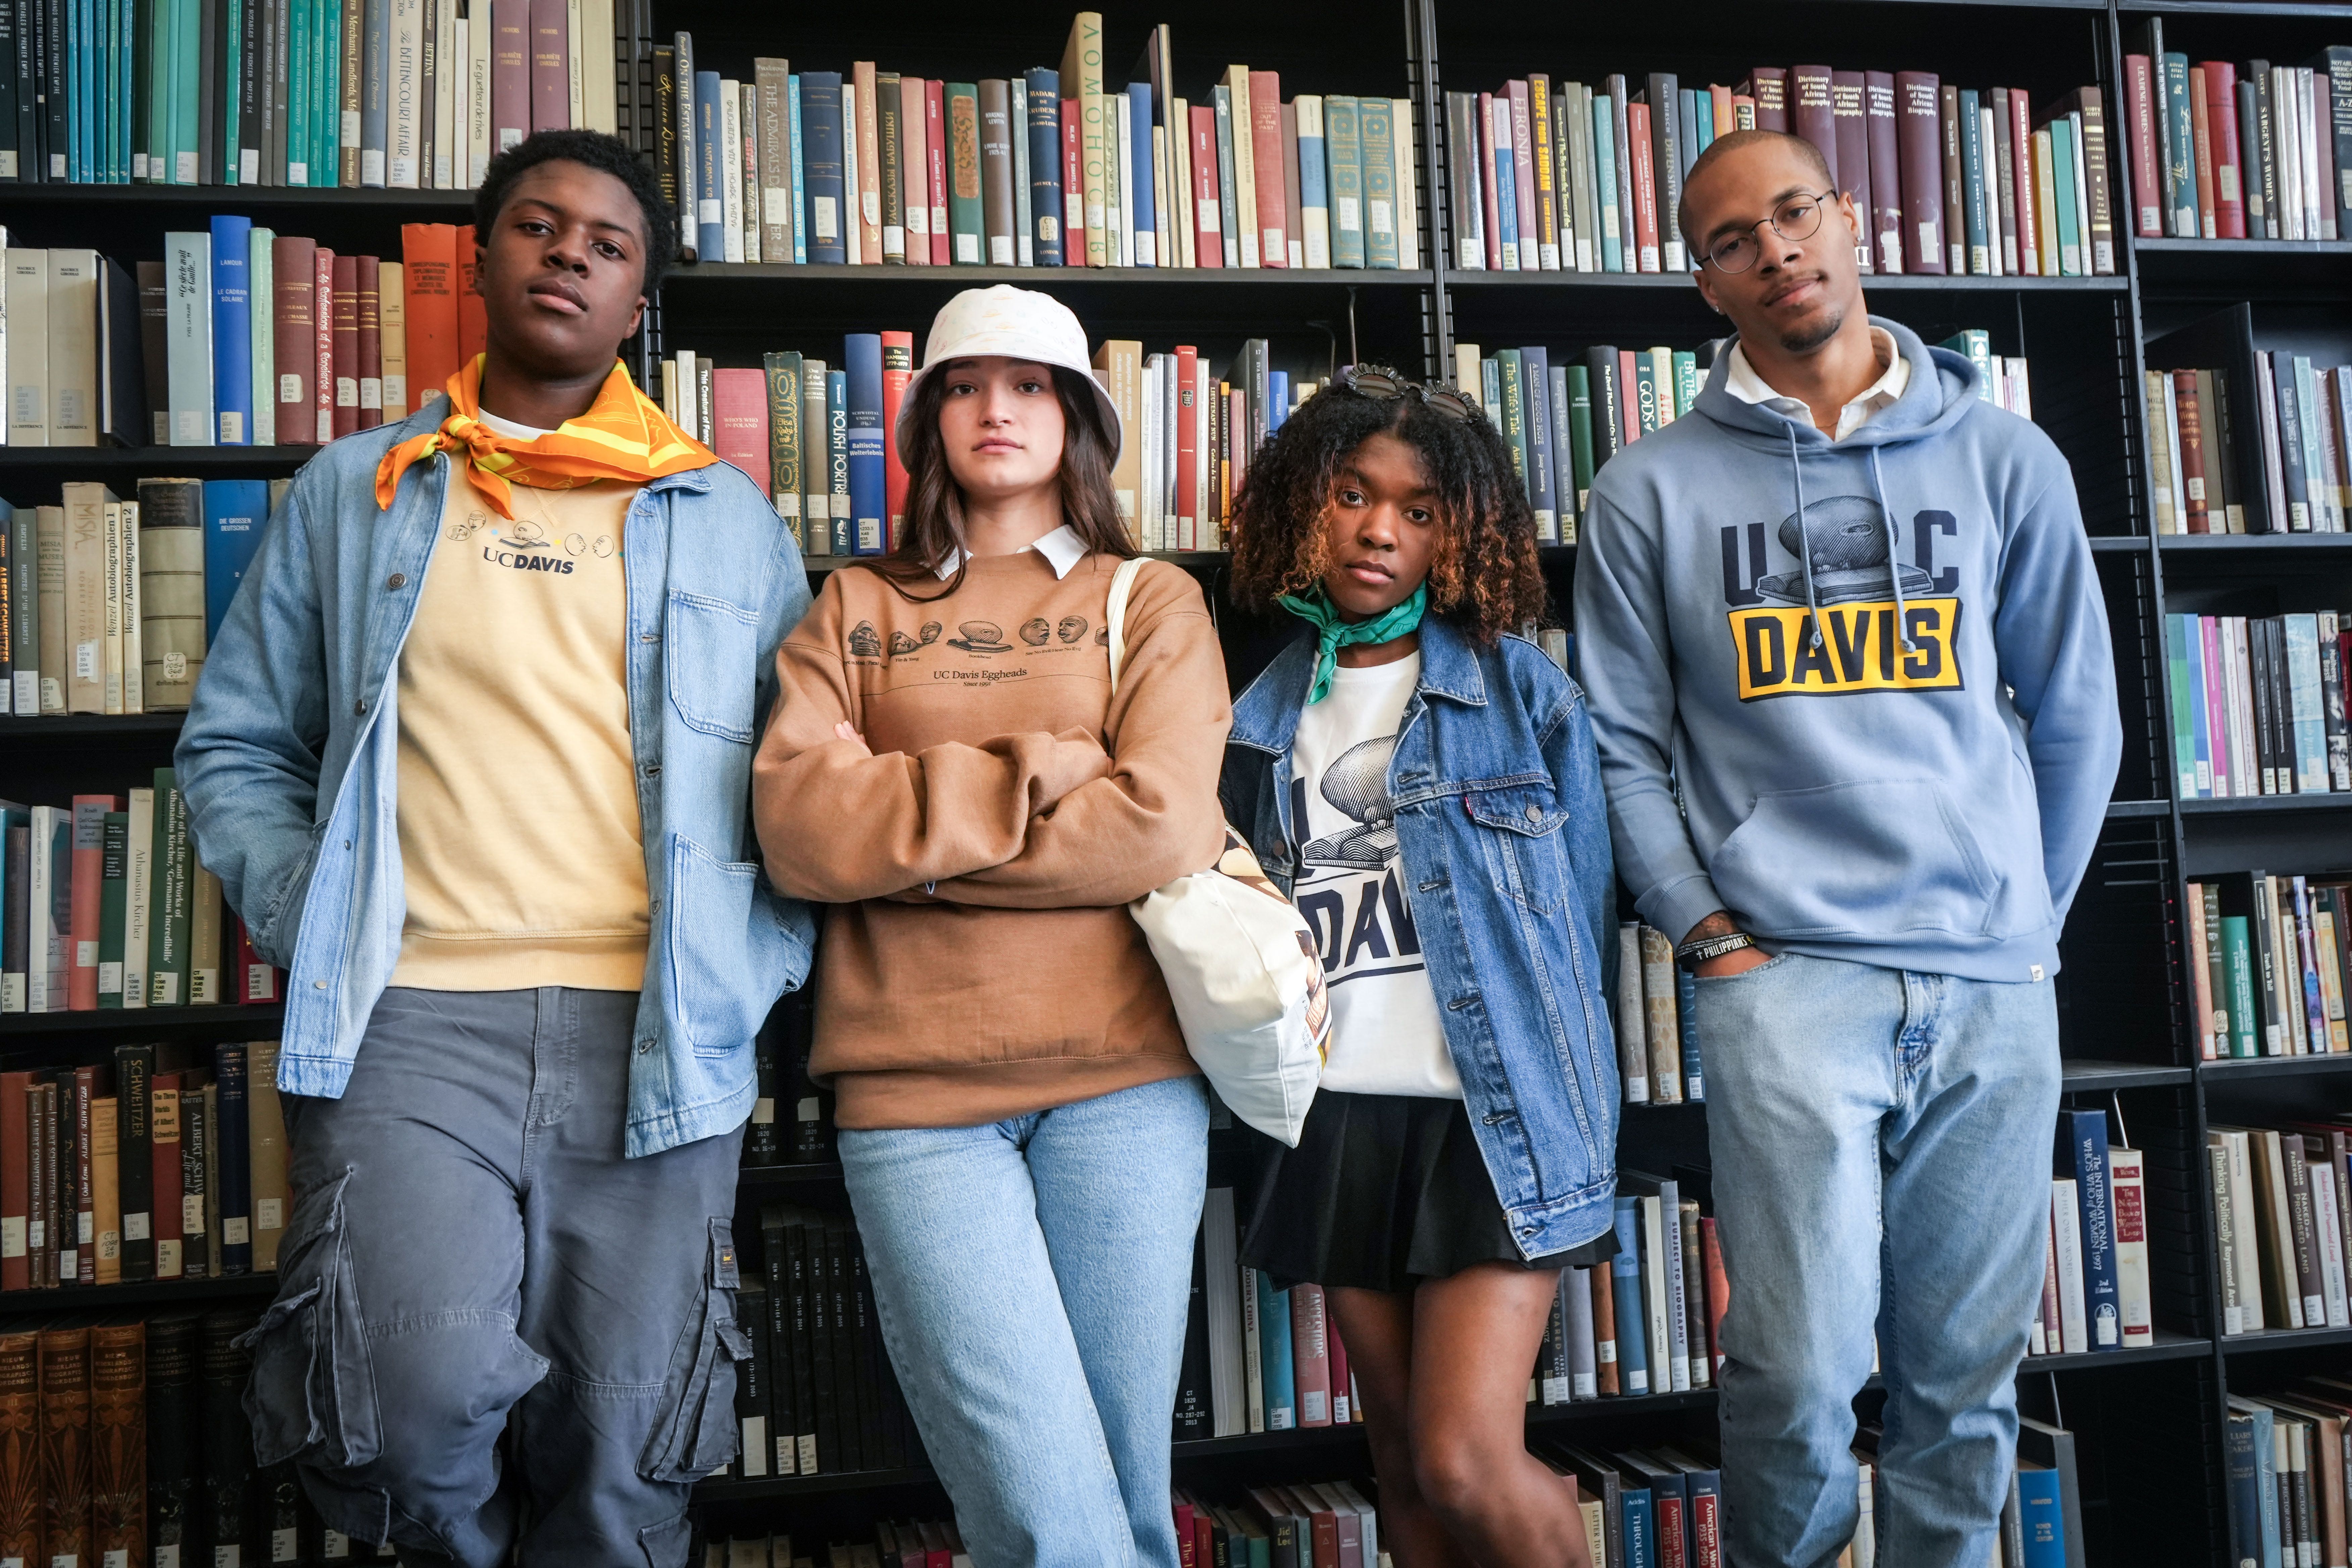 four students stand next to each other and face the camera in a library setting. all four are wearing apparel from the new Arneson Egghead Collection featuring the Egghead sculptures made by former UC Davis faculty Robert Arneson.